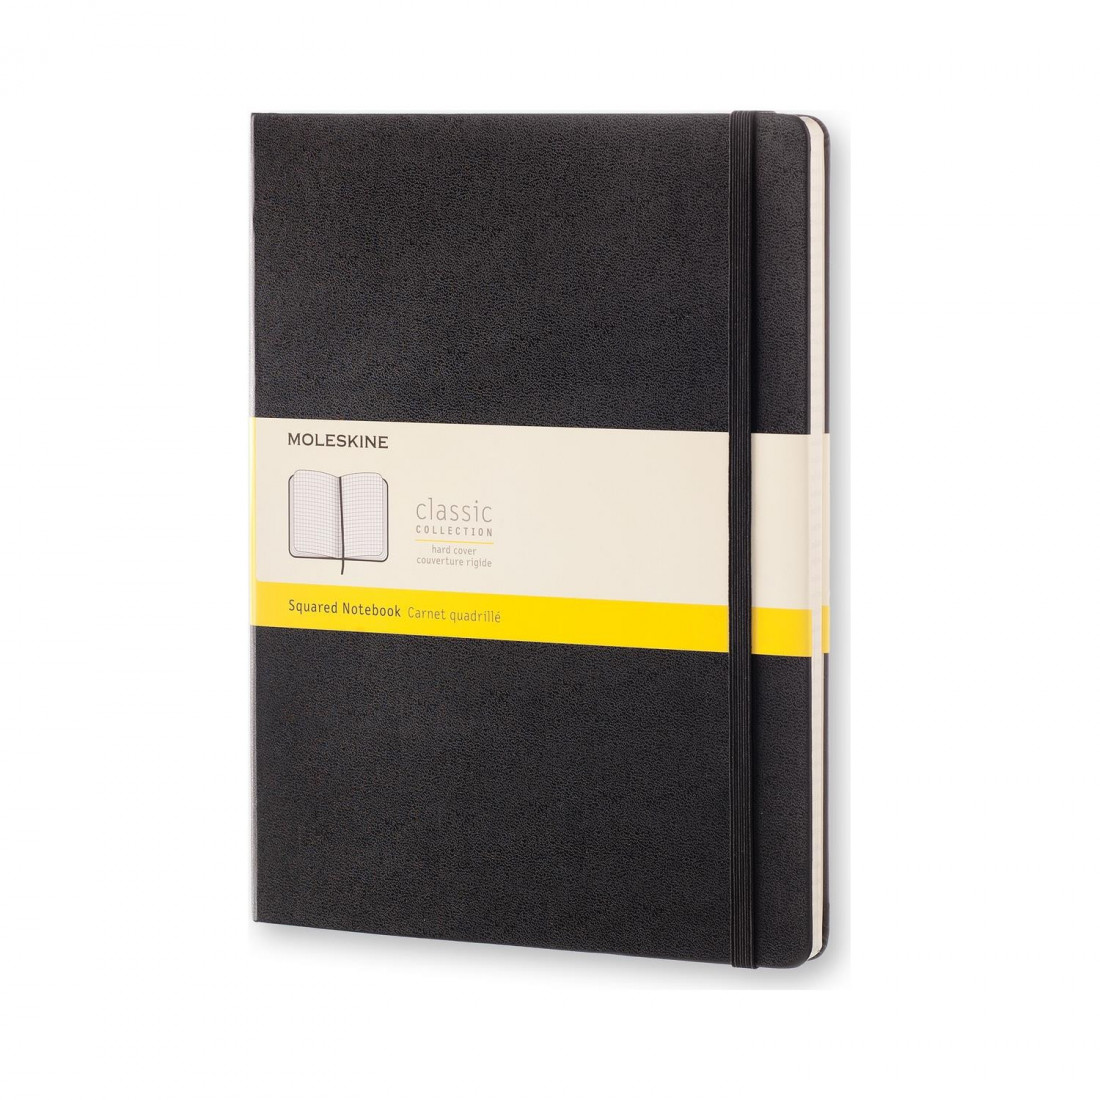 Notebook Extra Large 19x25 Squared Black Soft Cover Moleskine